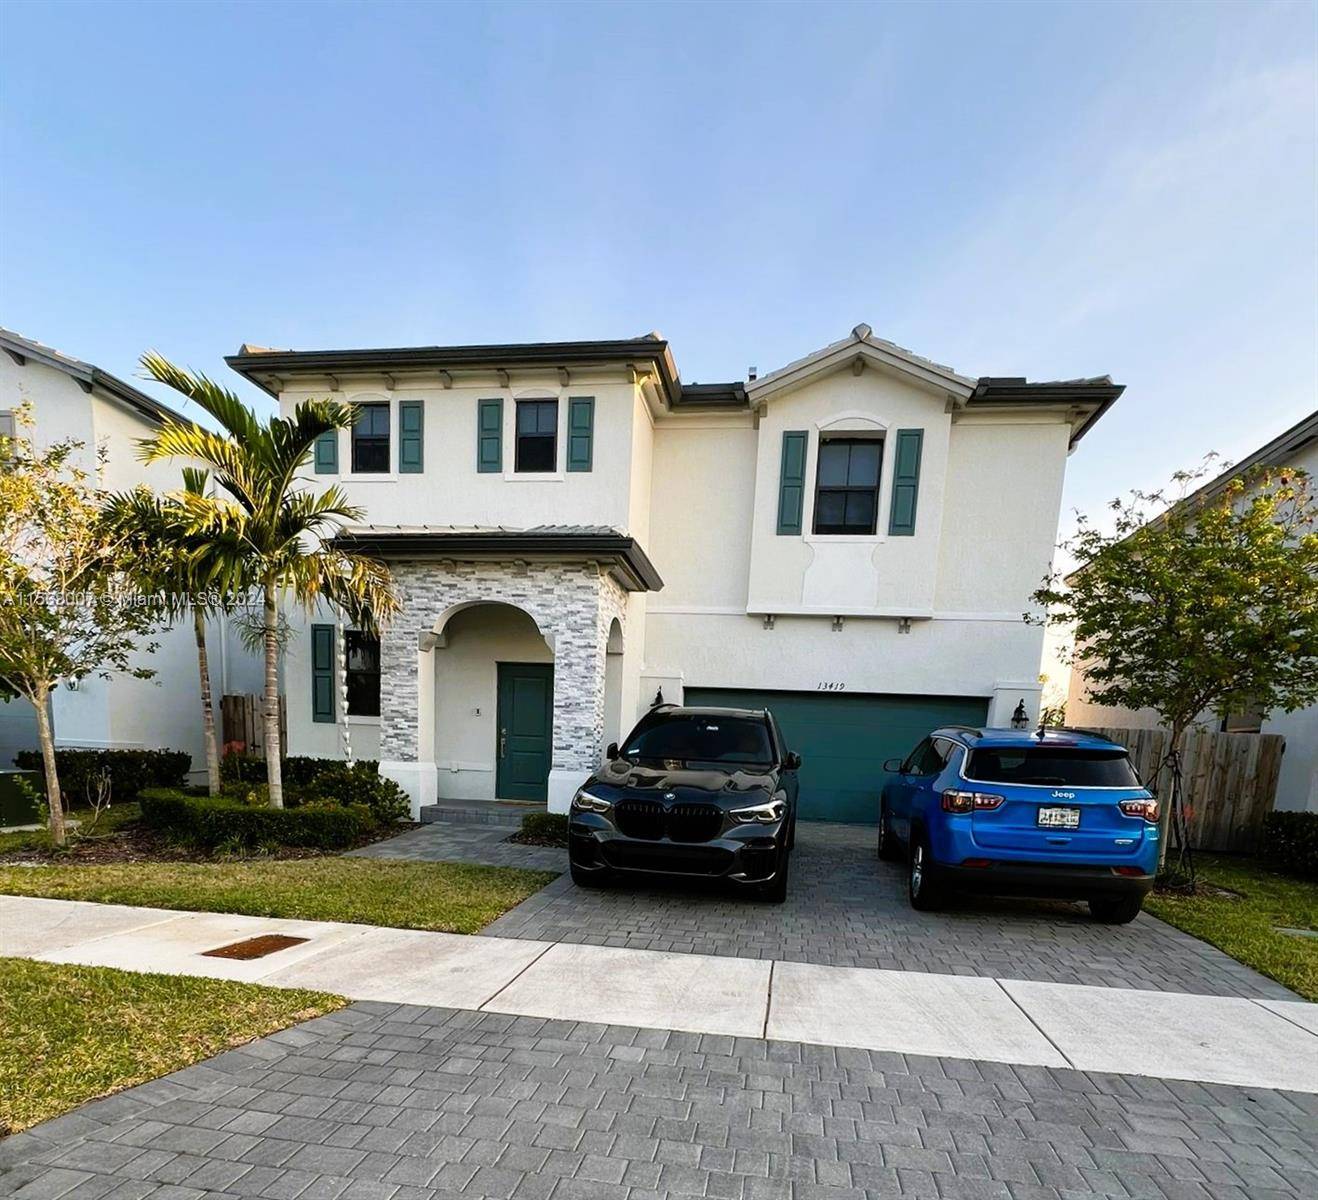 Beautiful and spacious five bedroom 3 bathroom single family home with a two car garage located in the Pine Vista community in Homestead Florida.